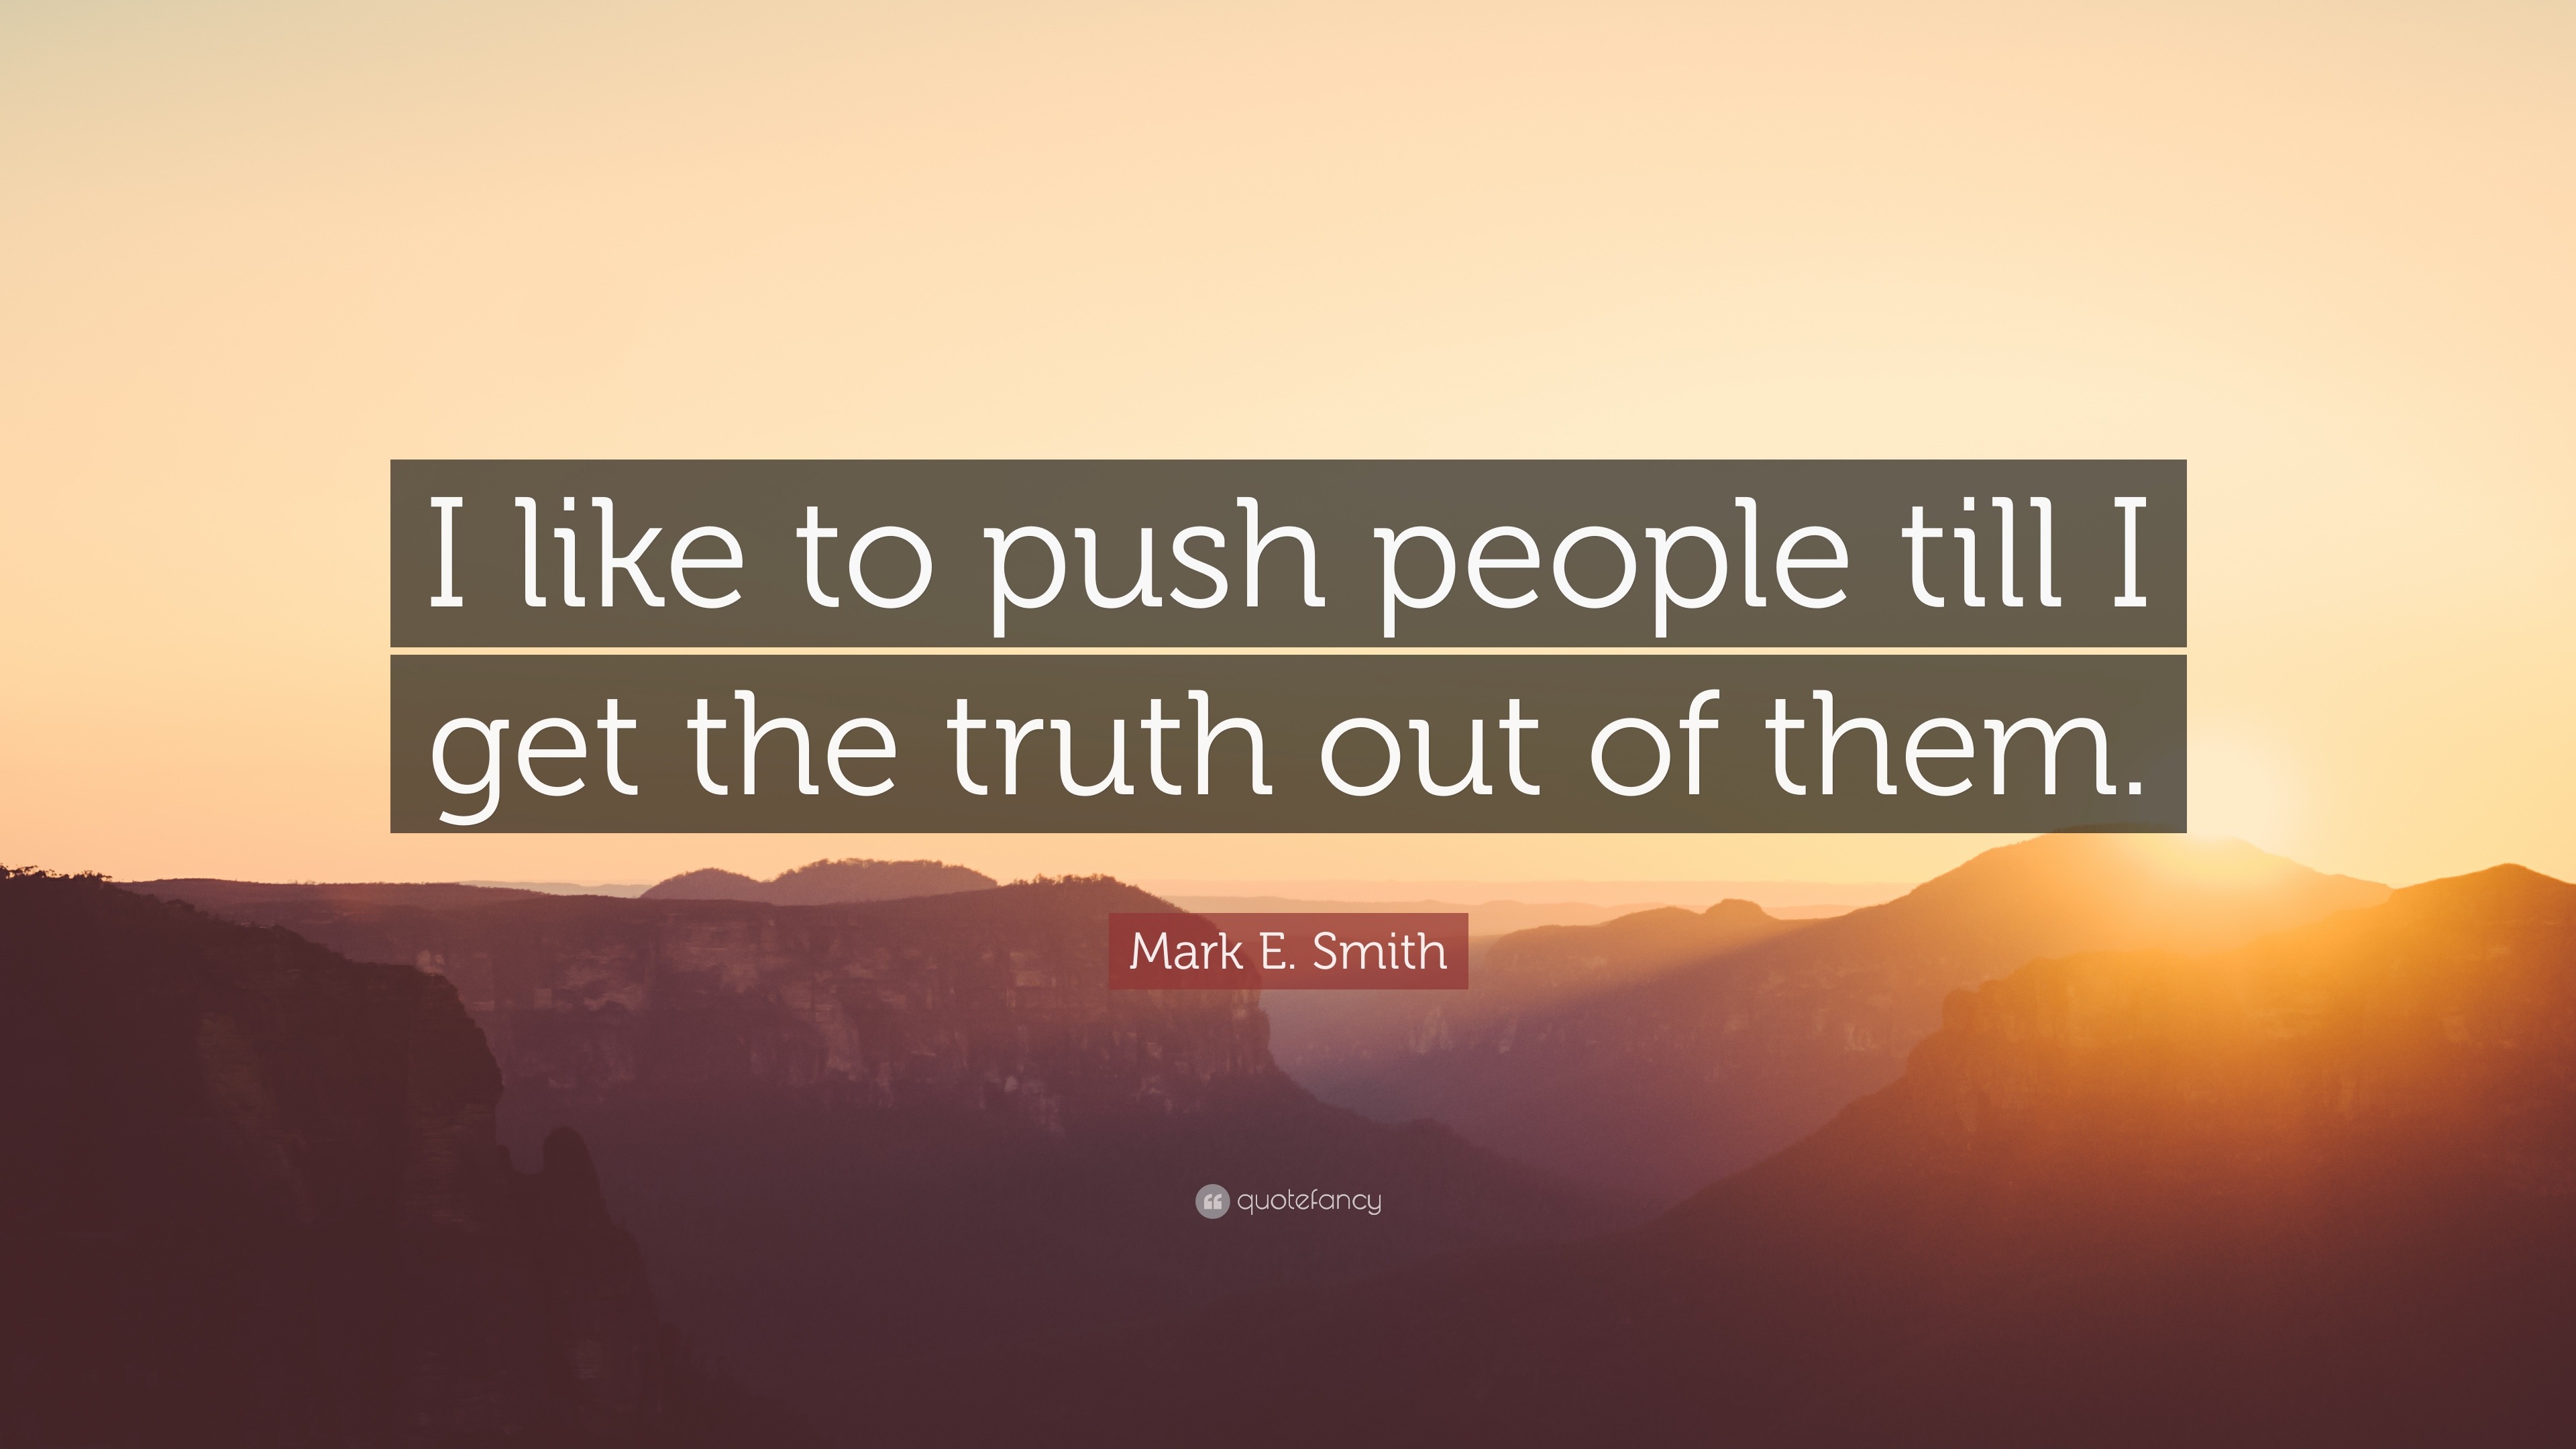 Mark E. Smith Quote: “I like to push people till I get the truth out of